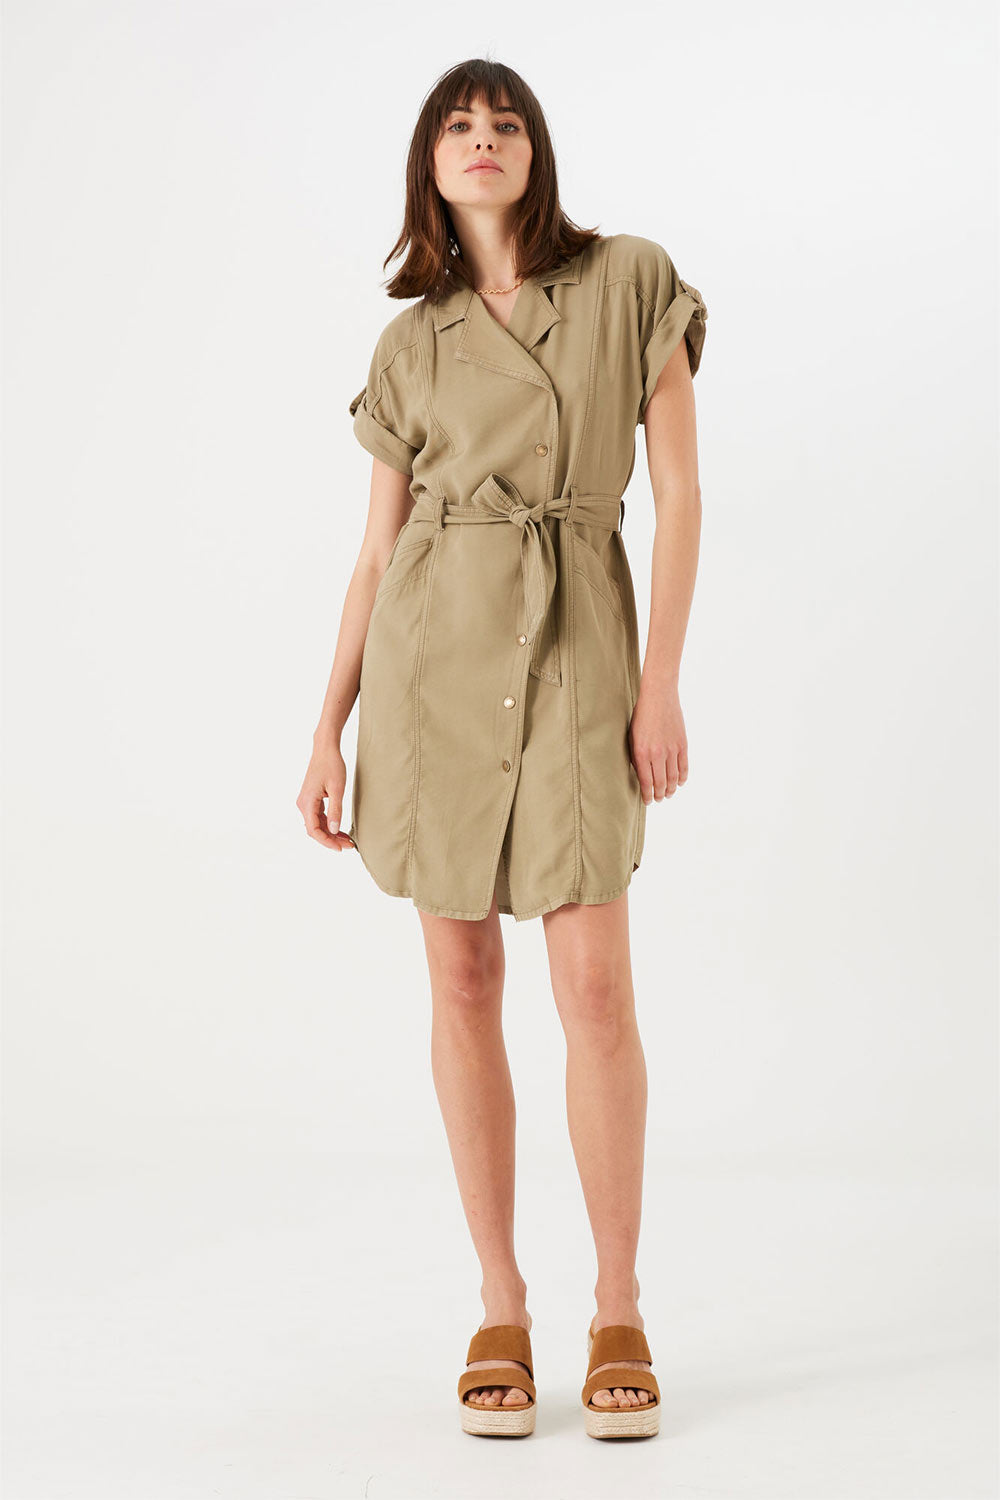 Front of Garcia (O400871) Women's Short Sleeve Belted Khaki Mine Dress, With Snap Open and Notched Collar